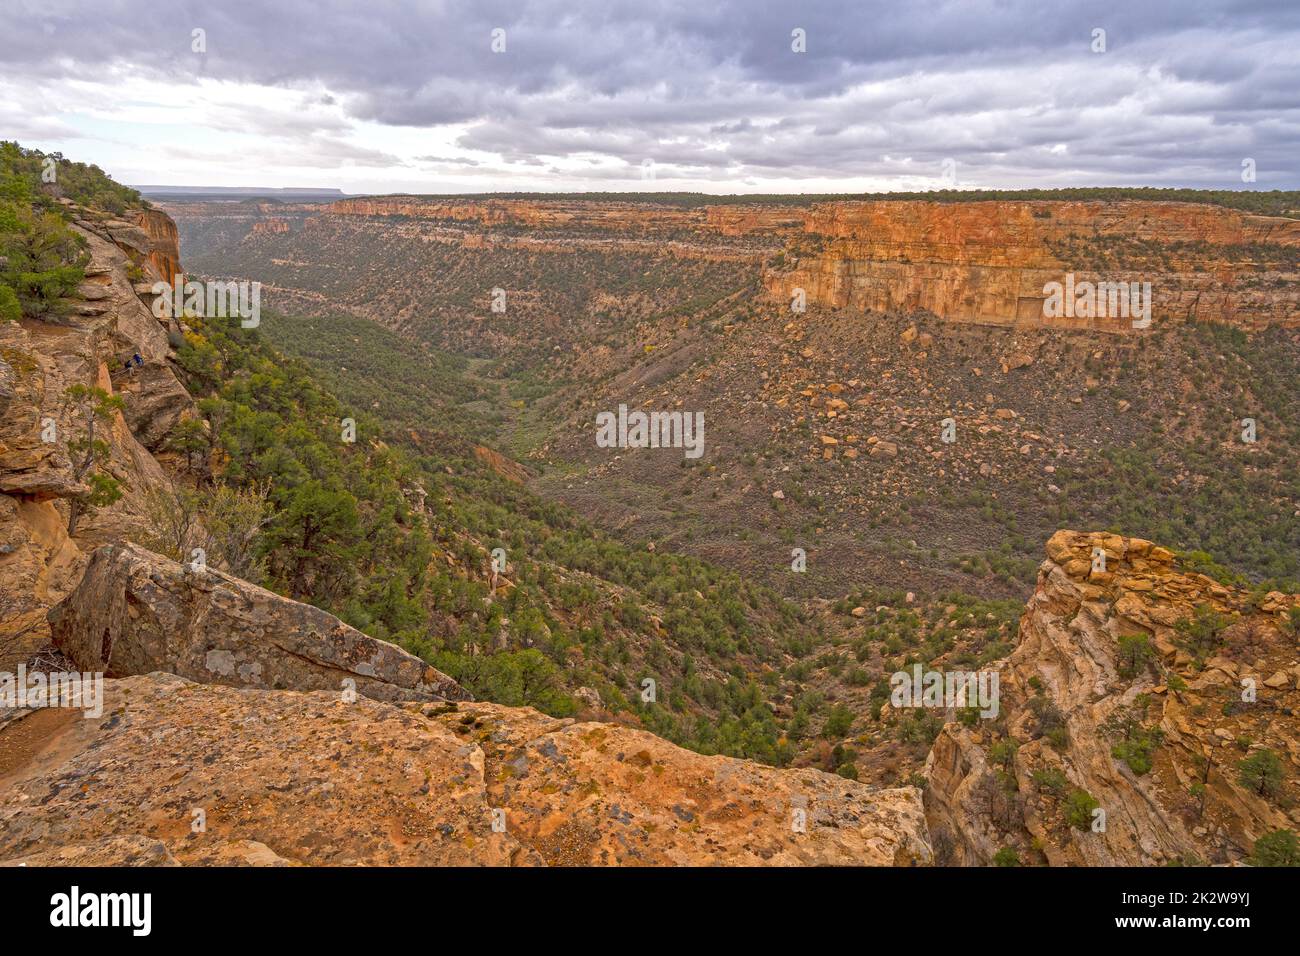 Cliffs and Canyons in Scrublands of the West Stock Photo